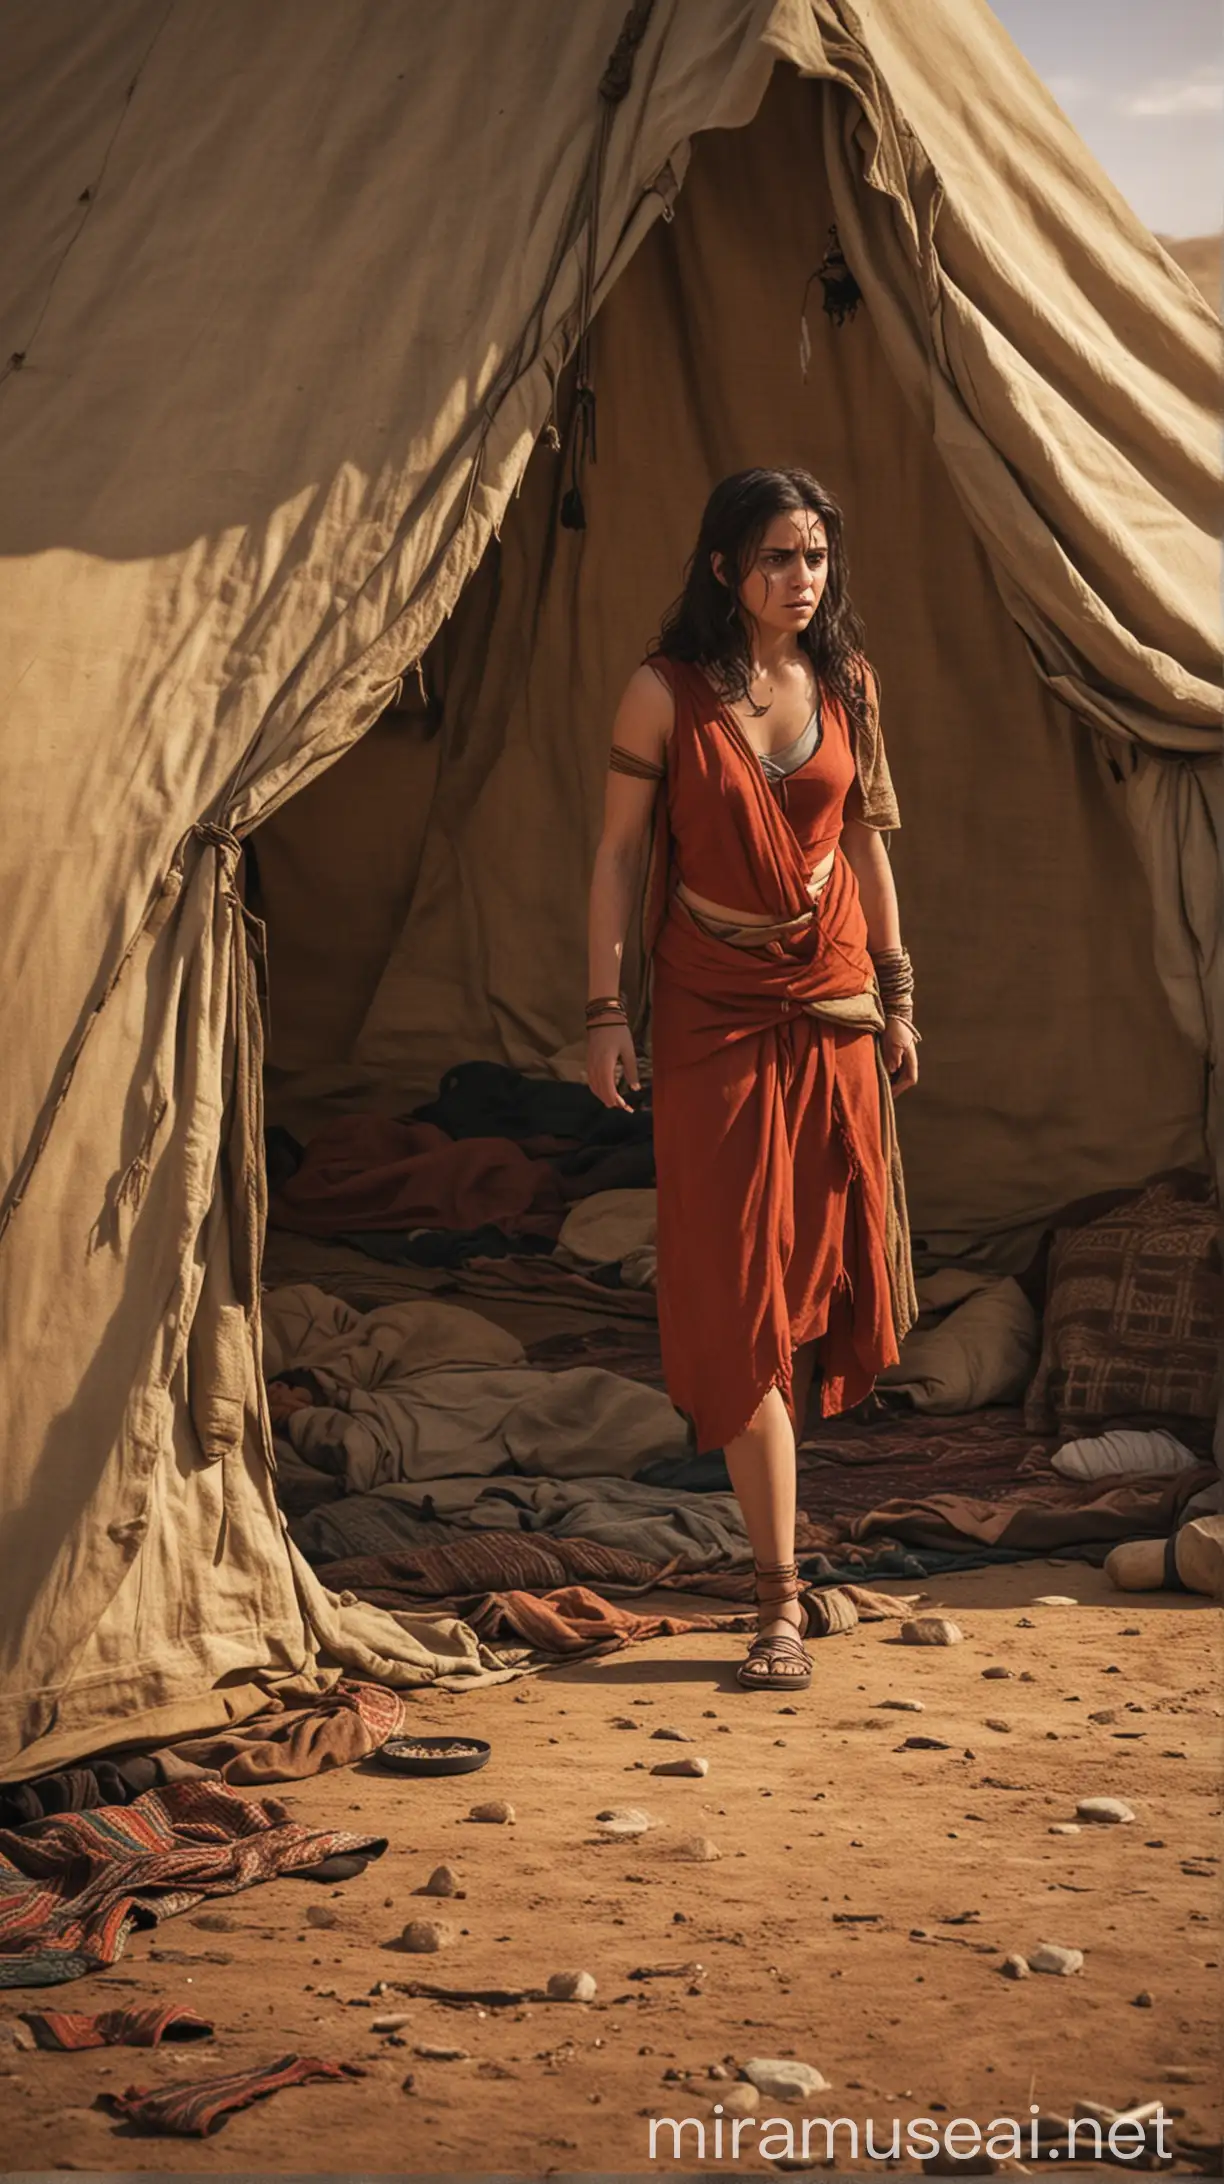 Create an image of Sisera arriving at Jael's tent, exhausted and desperate for refuge. She should be seen welcoming him into the tent, offering a sense of false security."In ancient world 